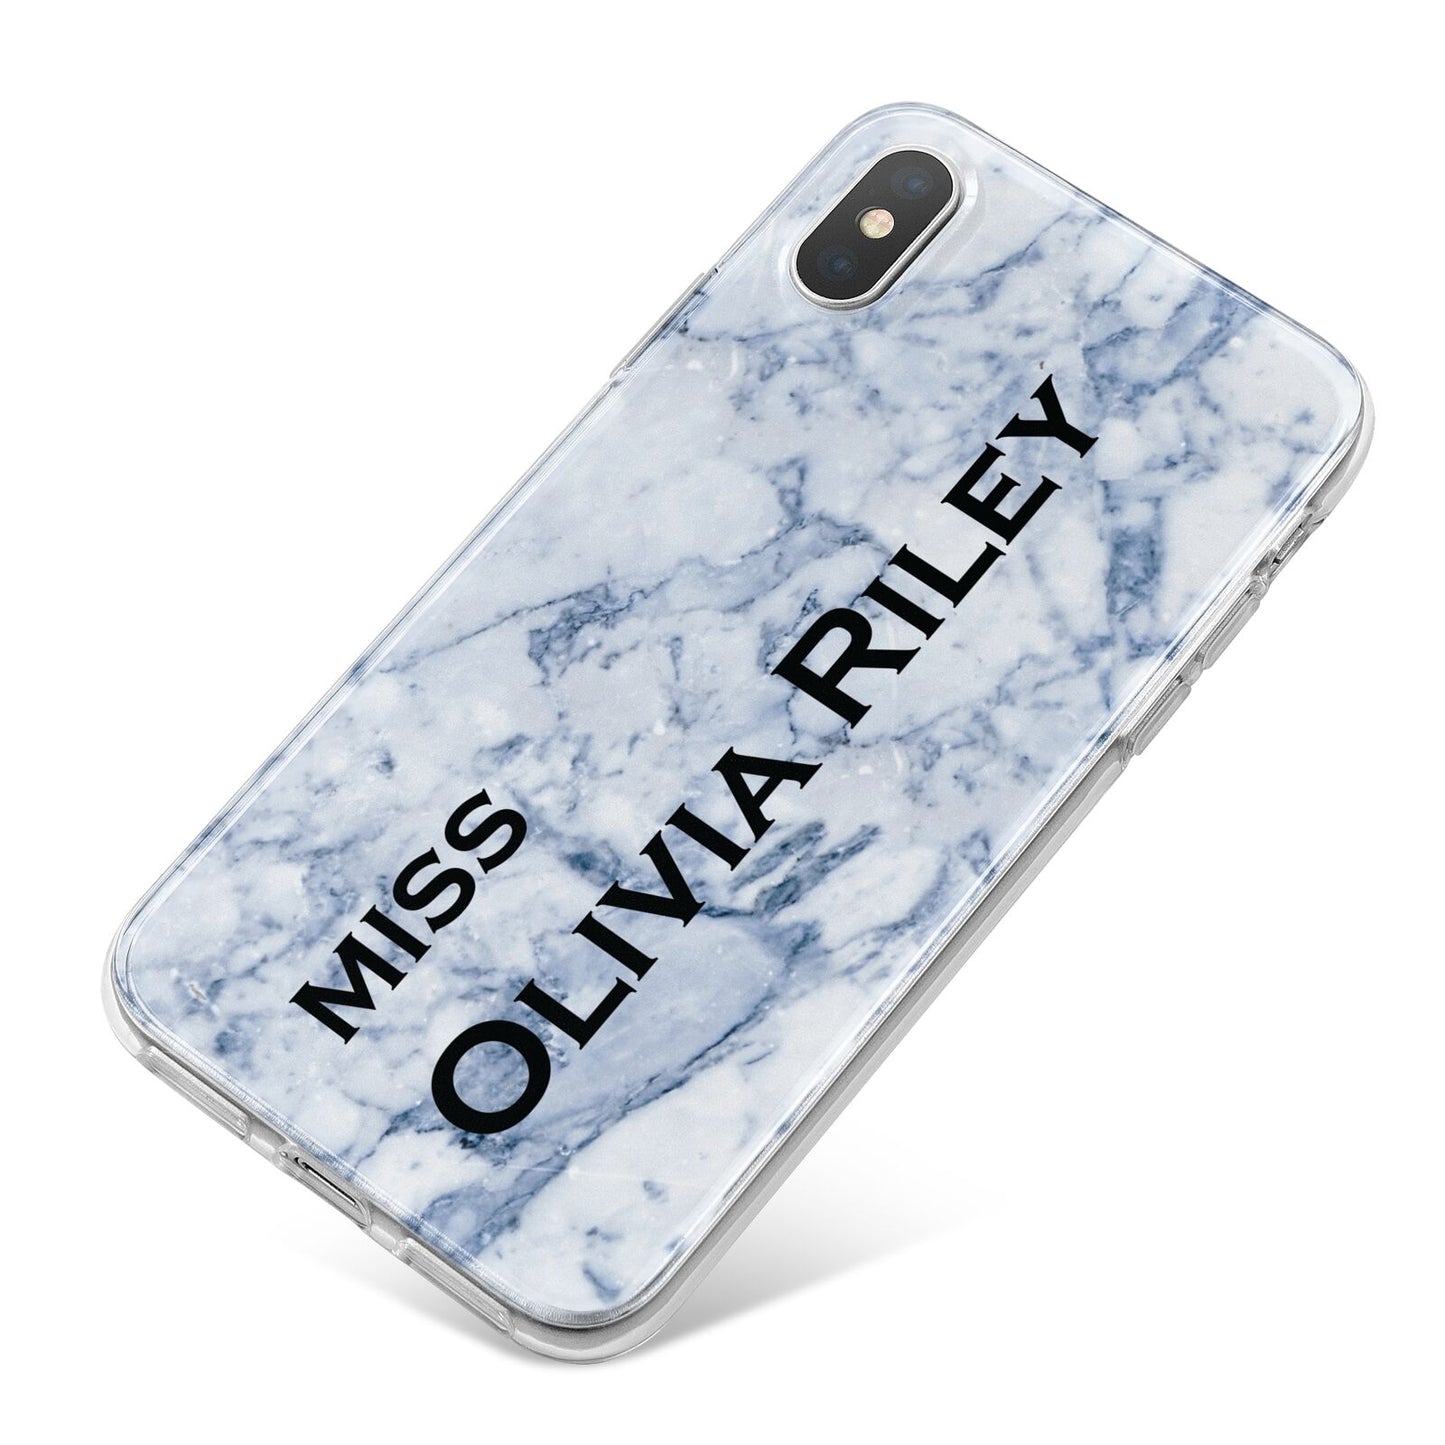 Full Name Grey Marble iPhone X Bumper Case on Silver iPhone